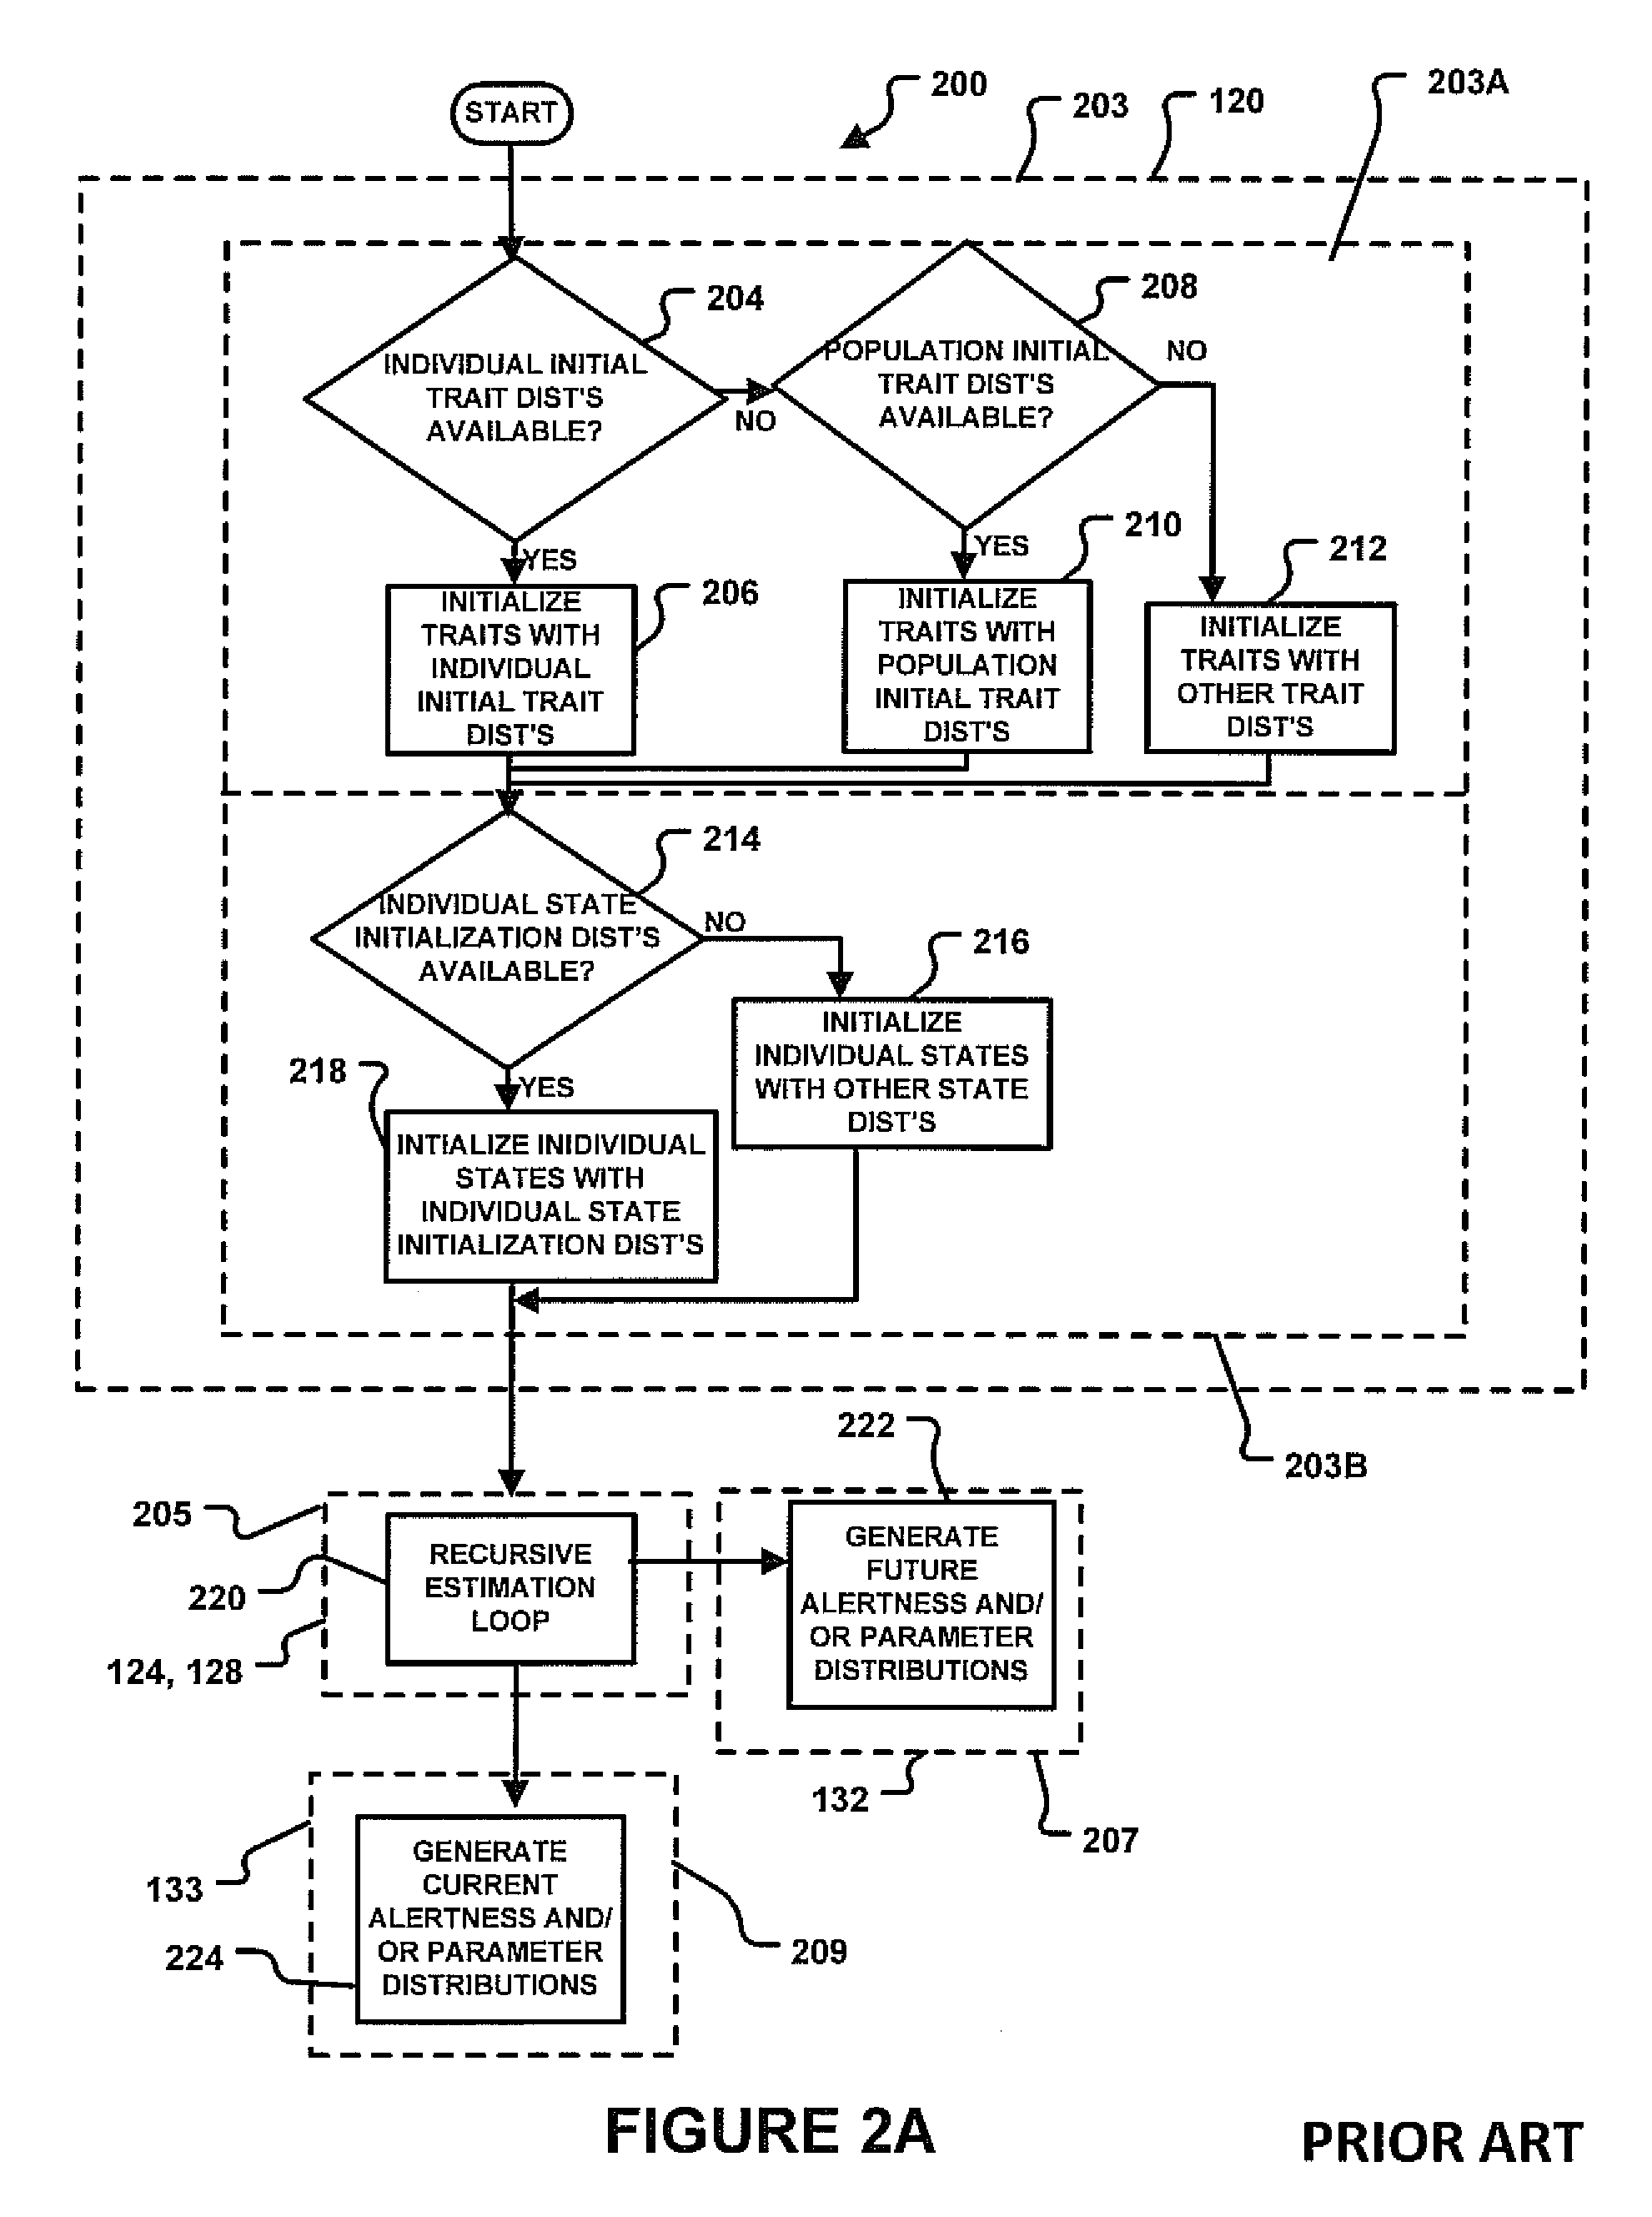 Systems and Methods for Distributed Calculation of Fatigue-Risk Prediction and Optimization